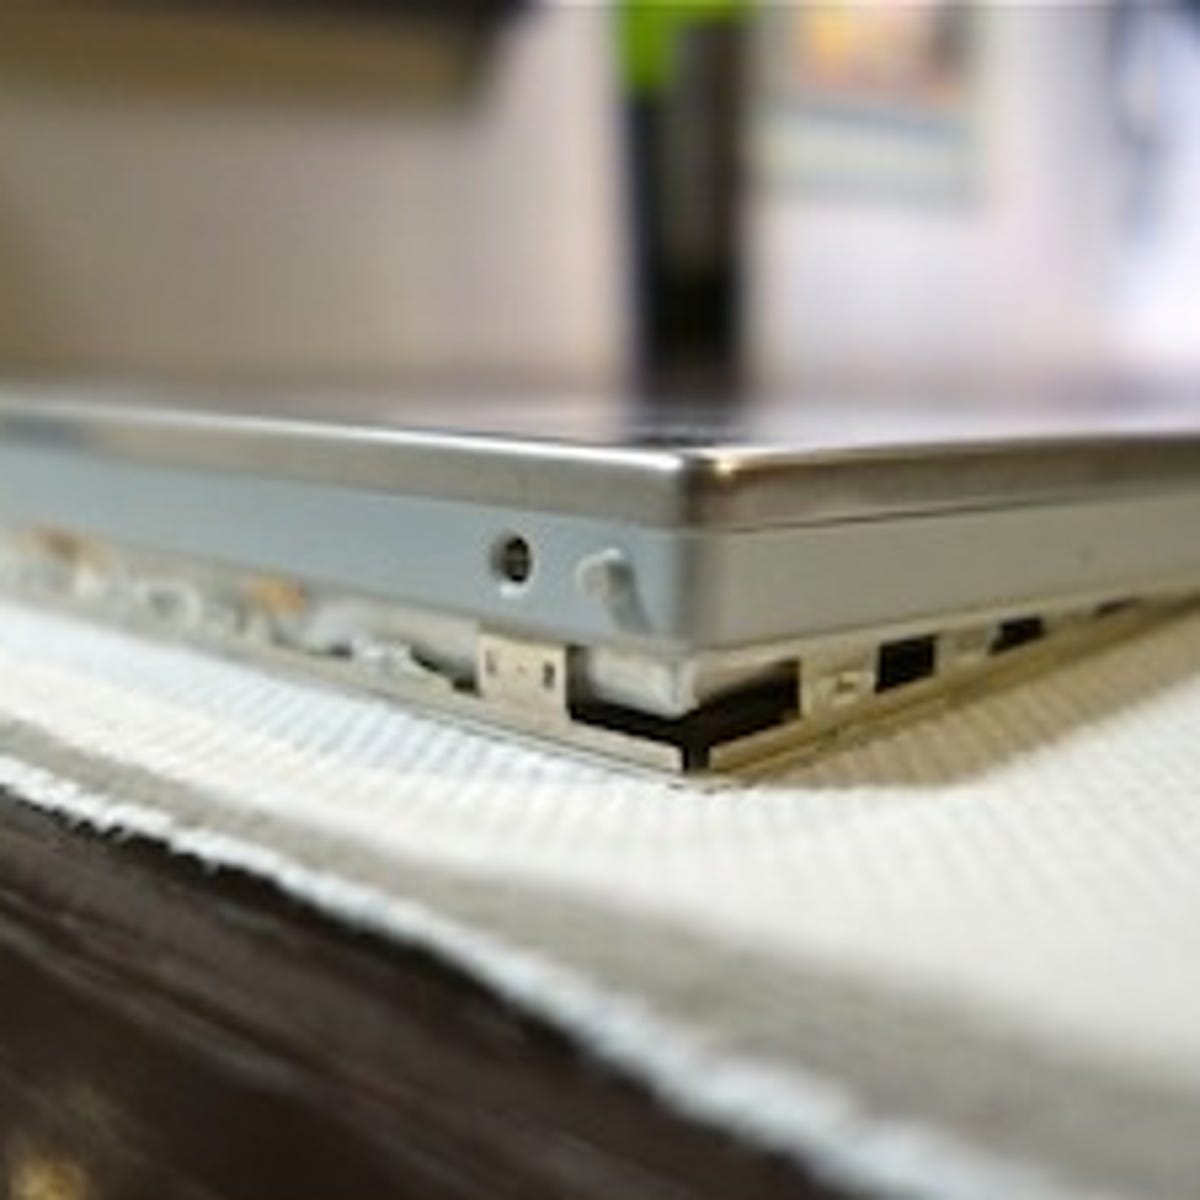 Apple MacBook battery: Exploded |